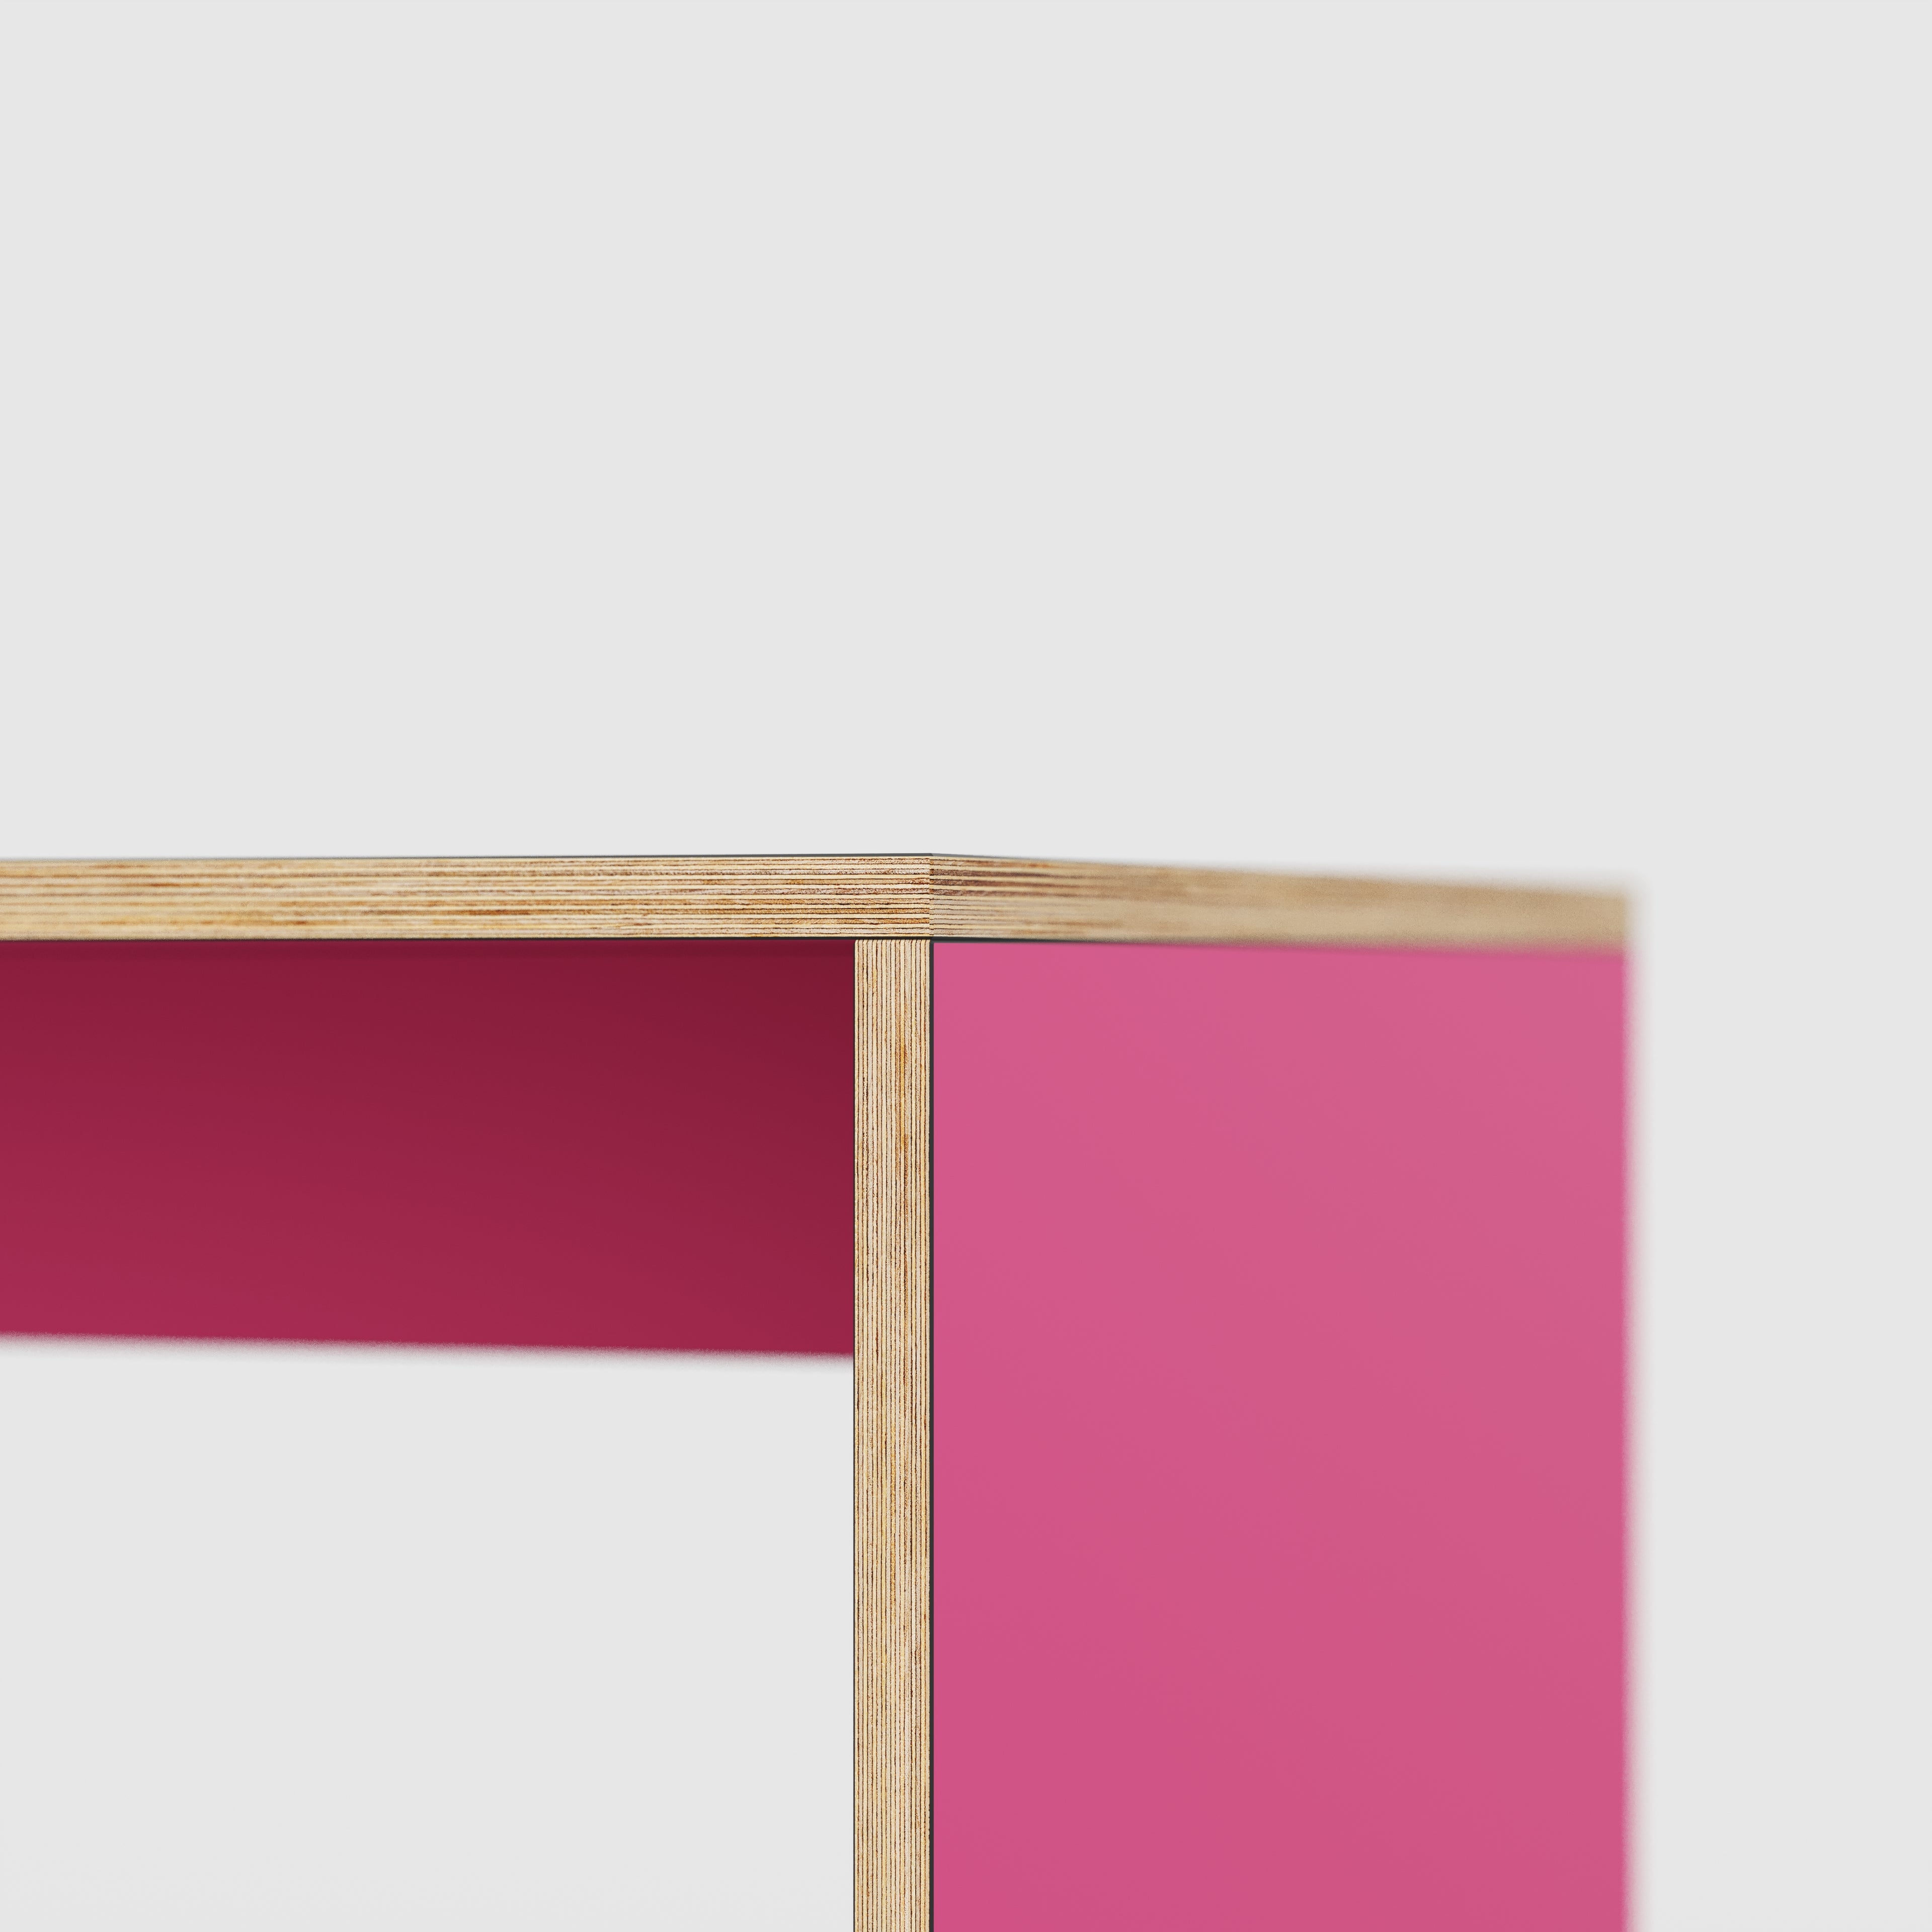 Coffee Table with Solid Sides - Formica Juicy Pink - 1200(w) x 600(d) x 450(h)